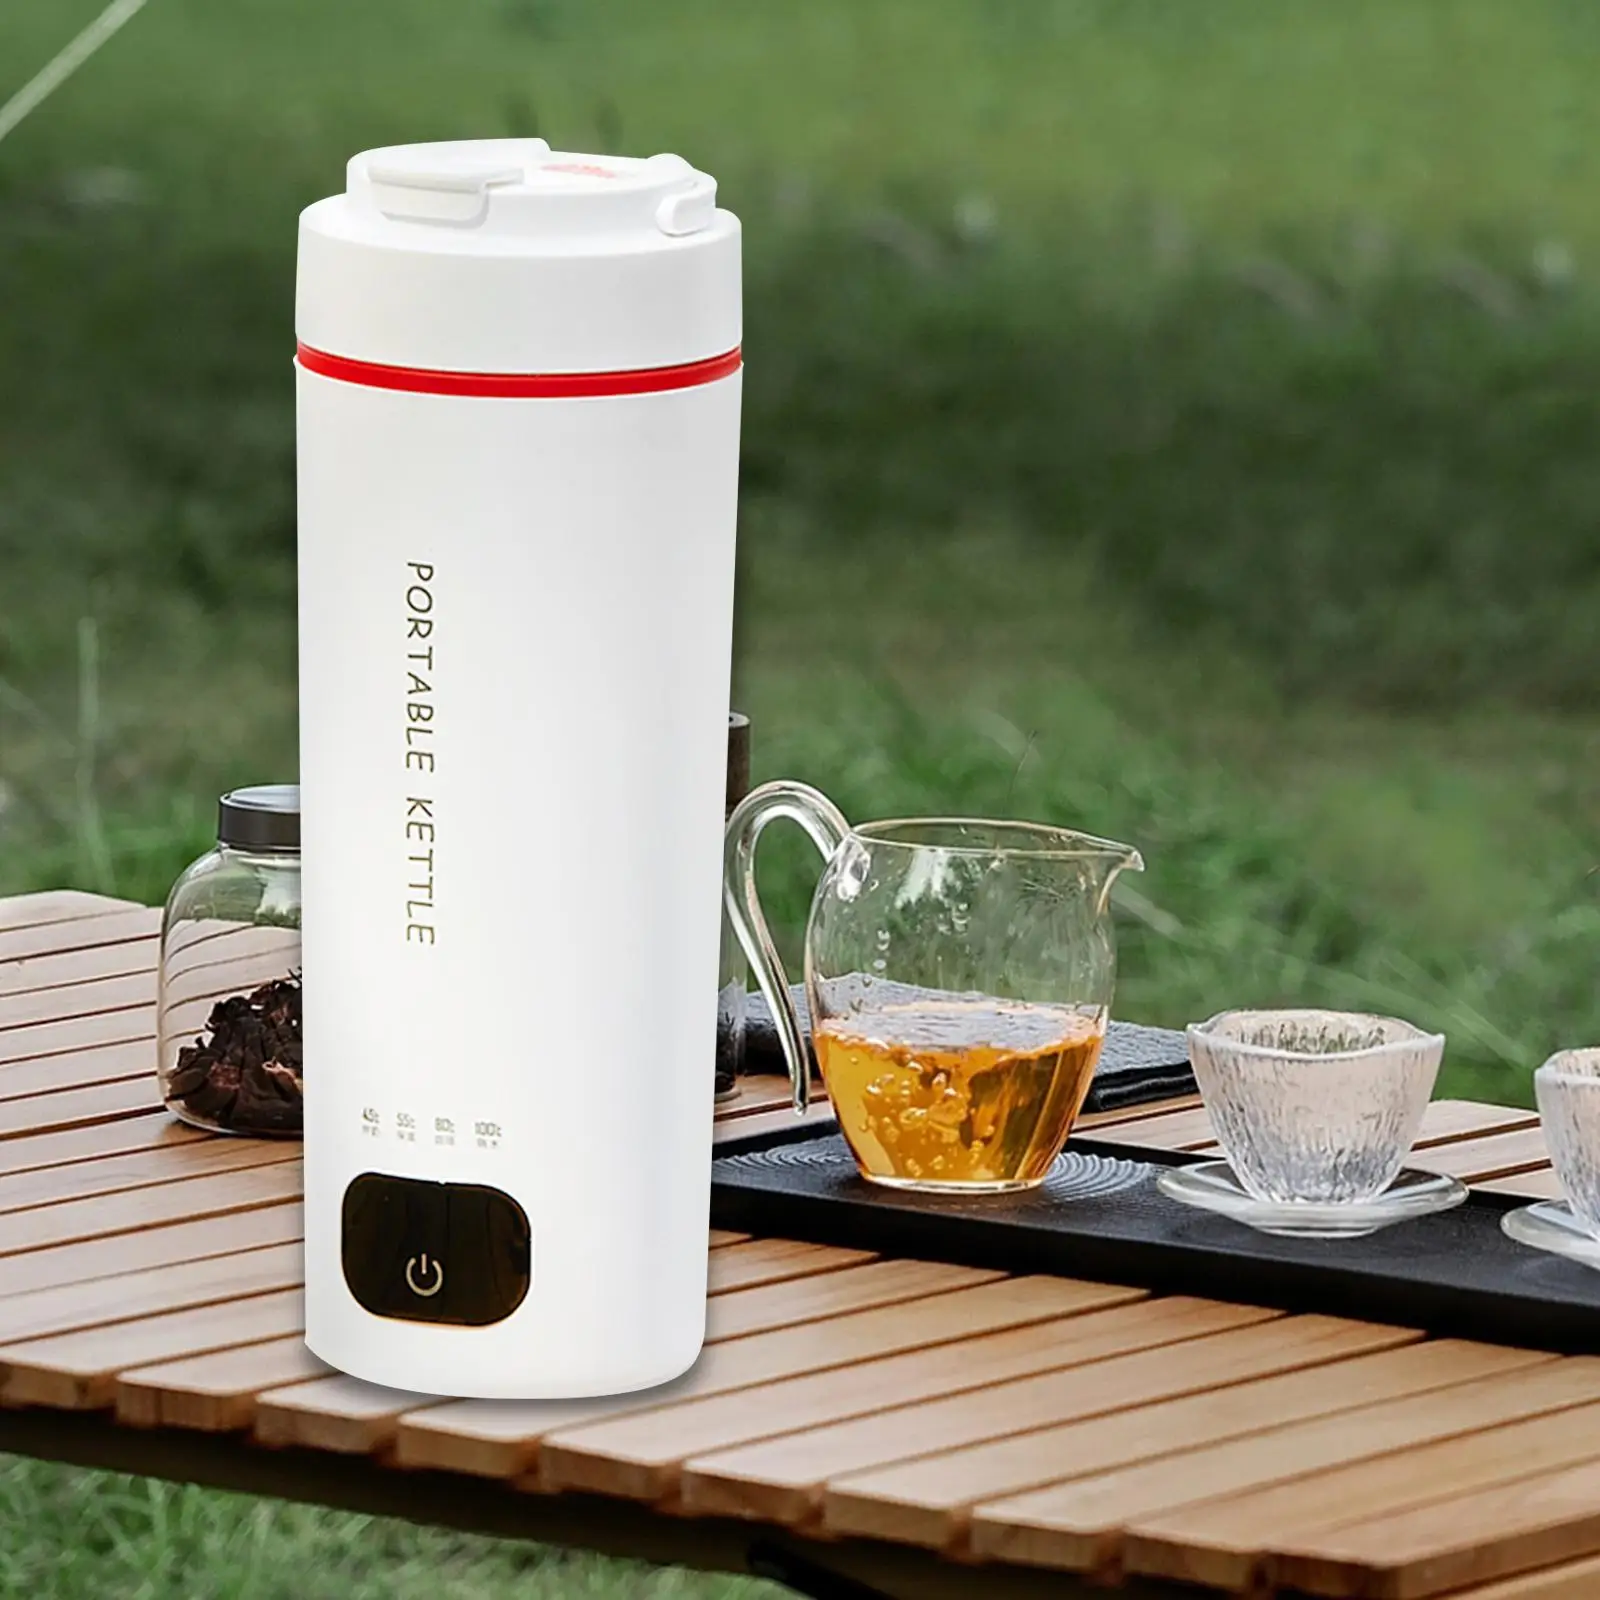 Portable Electric Kettle Auto Shut Off Stainless Steel Tea Coffee Kettle Water Boiler for Chocolate Tea Honey Water Milk Camping